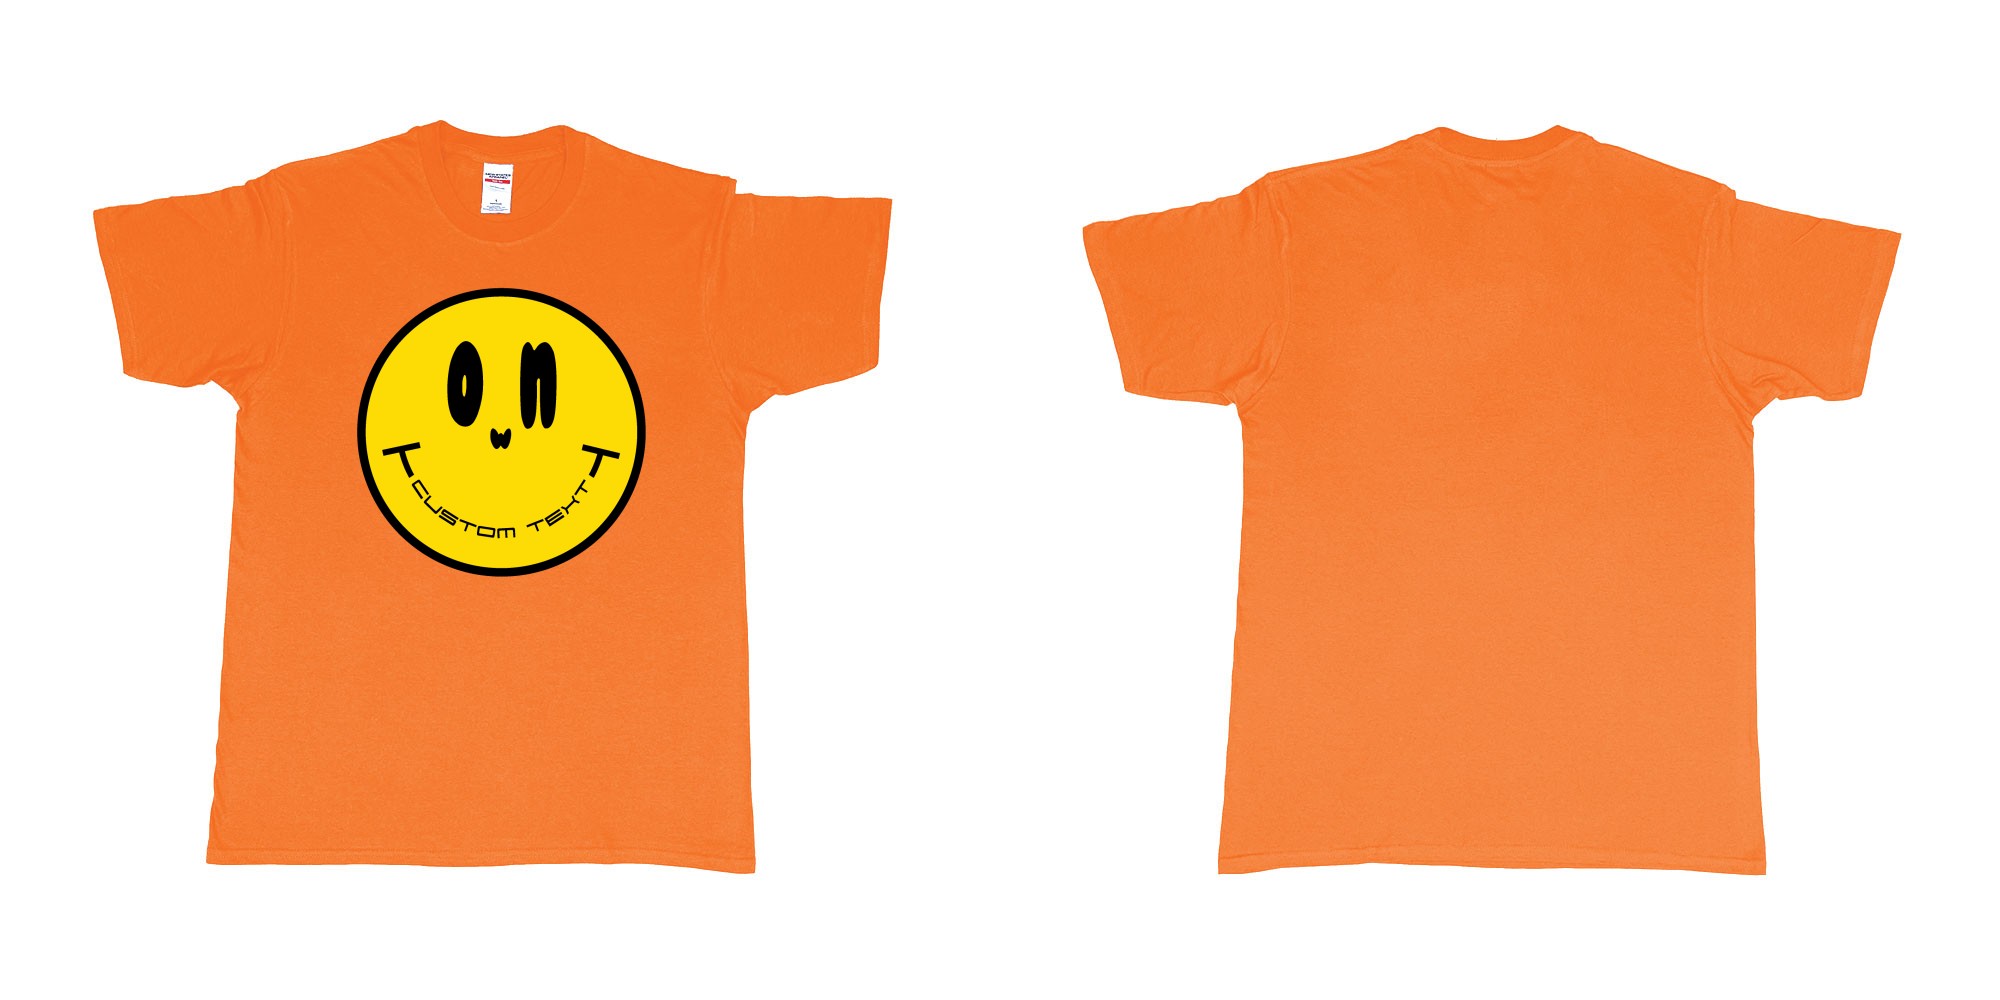 Custom tshirt design smiley face emoji custom text in fabric color orange choice your own text made in Bali by The Pirate Way